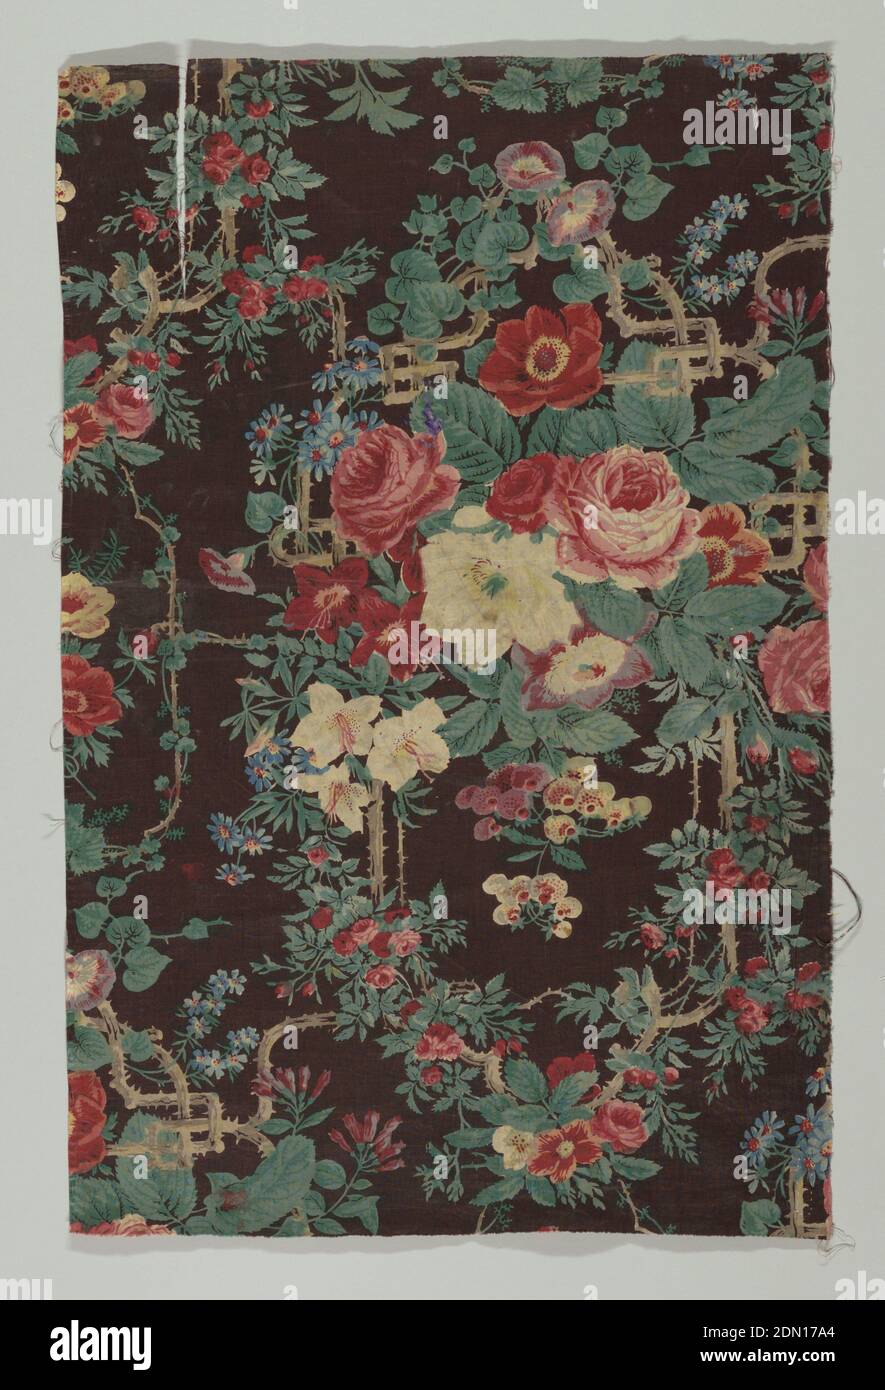 Textile, Medium: cotton Technique: woodblock printed, glazed, Large bouquet of roses with smaller climbing rose brances and other flowers. Background of dark brown and floral pattern in shades of red, green, blue and white., England, late 18th–19th century, printed, dyed & painted textiles, Textile Stock Photo